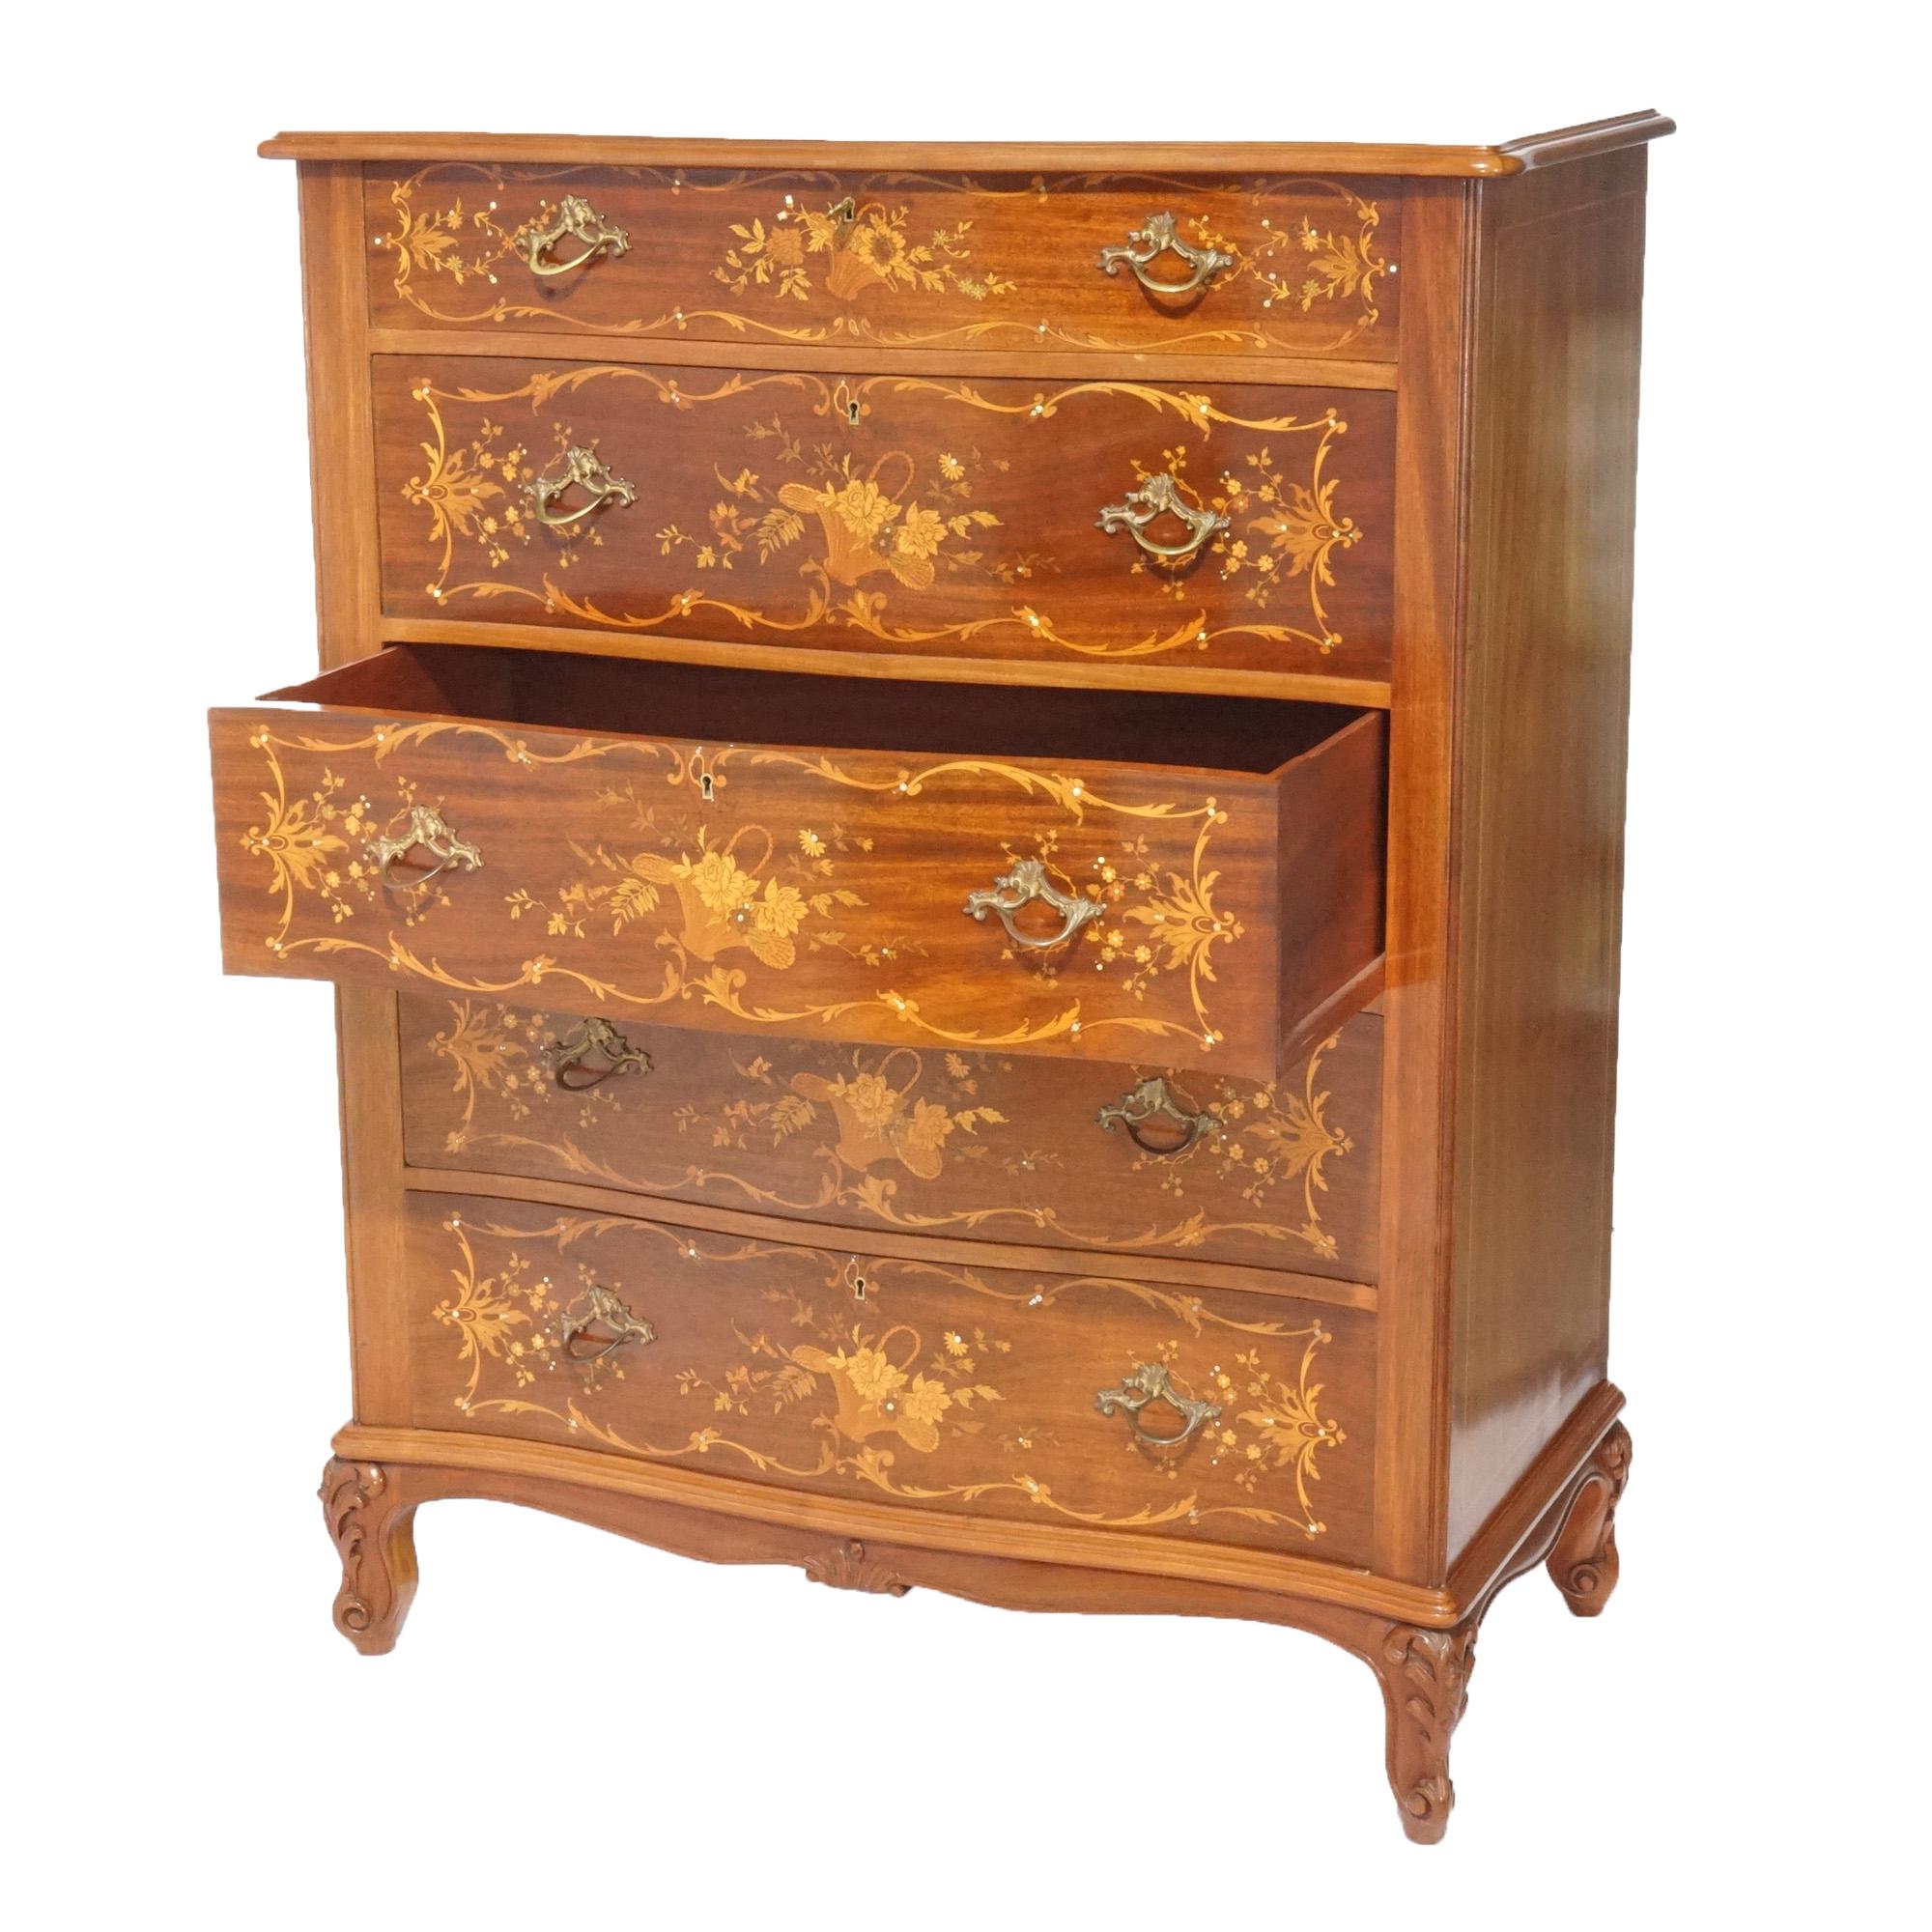 An antique RJ Horner high chest of drawers offers mahogany construction with five drawers having satinwood panier de fleurs marquetry design, raised on foliate carved cabriole legs, c1890

Measures- 49''H x 38''W x 19.75''D.